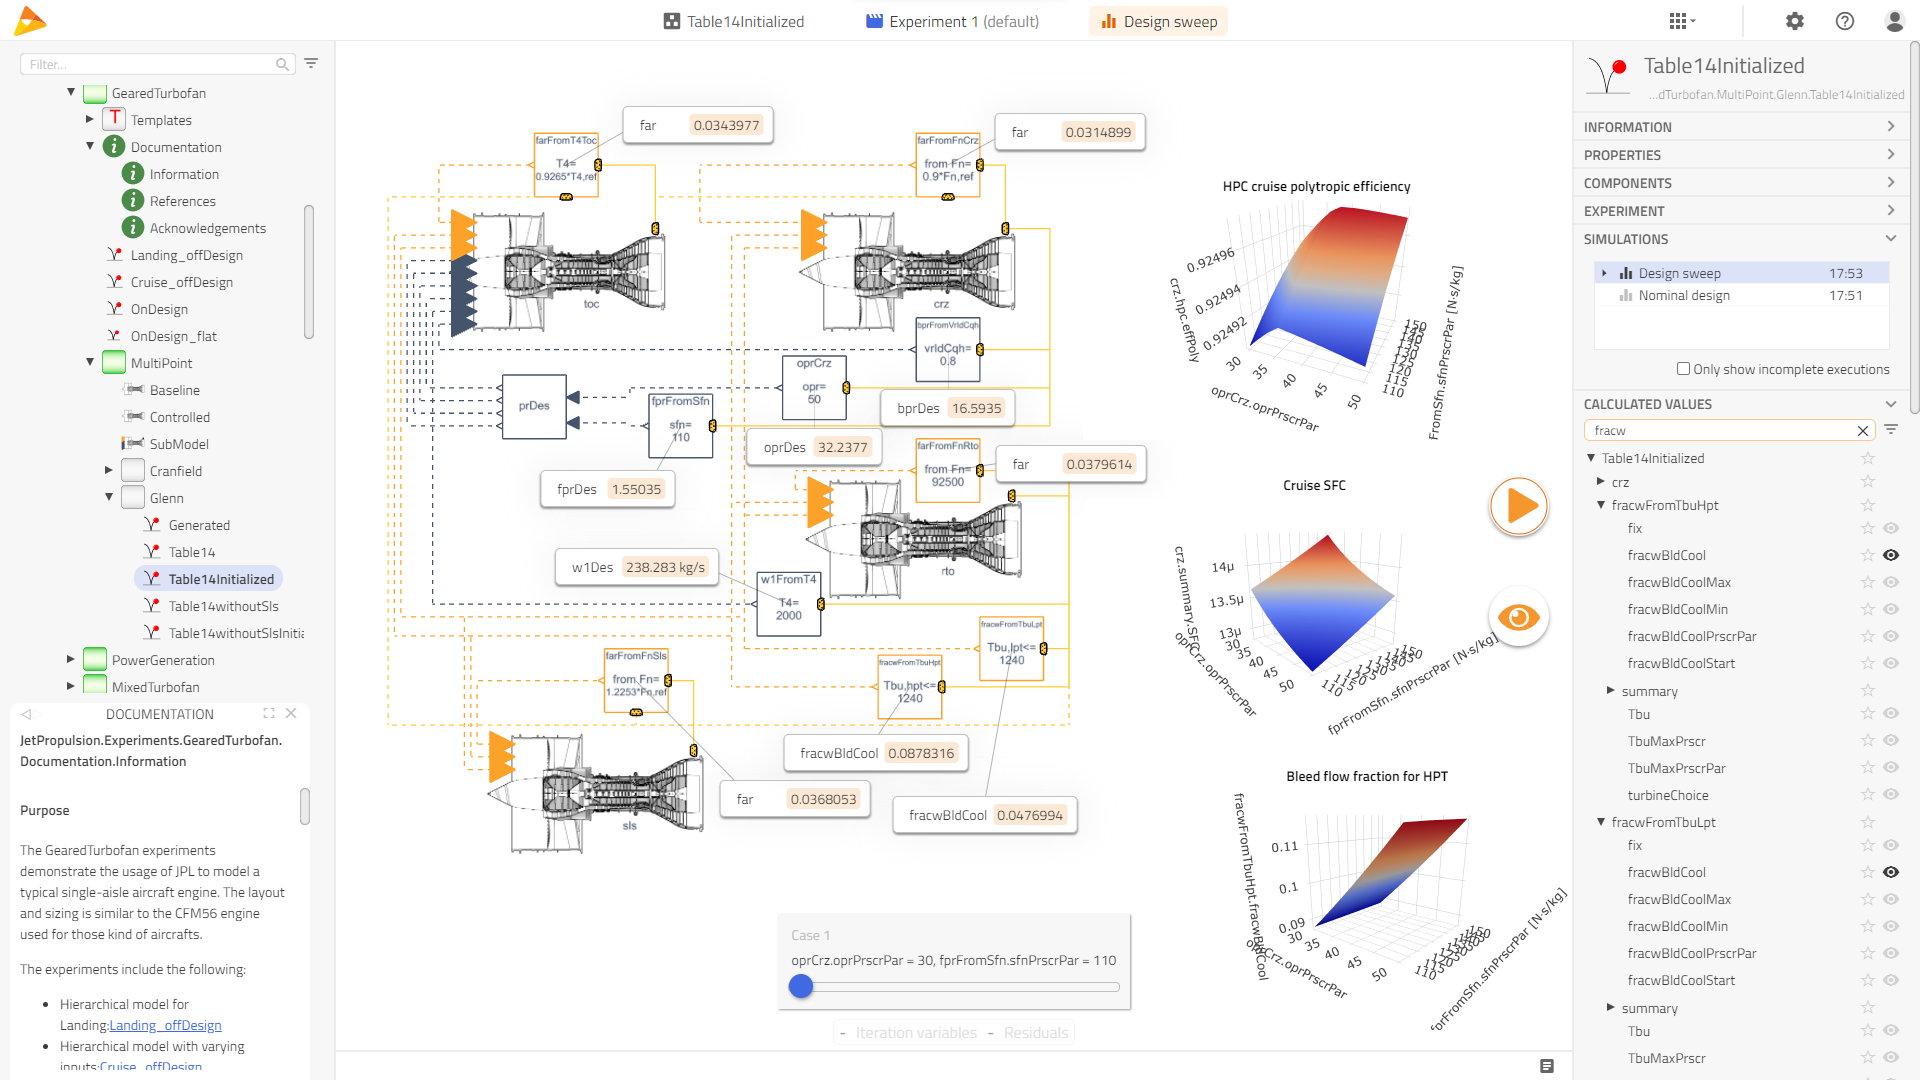 Simultaneously discover cycle design trade-offs across multiple operating points in gas turbines.